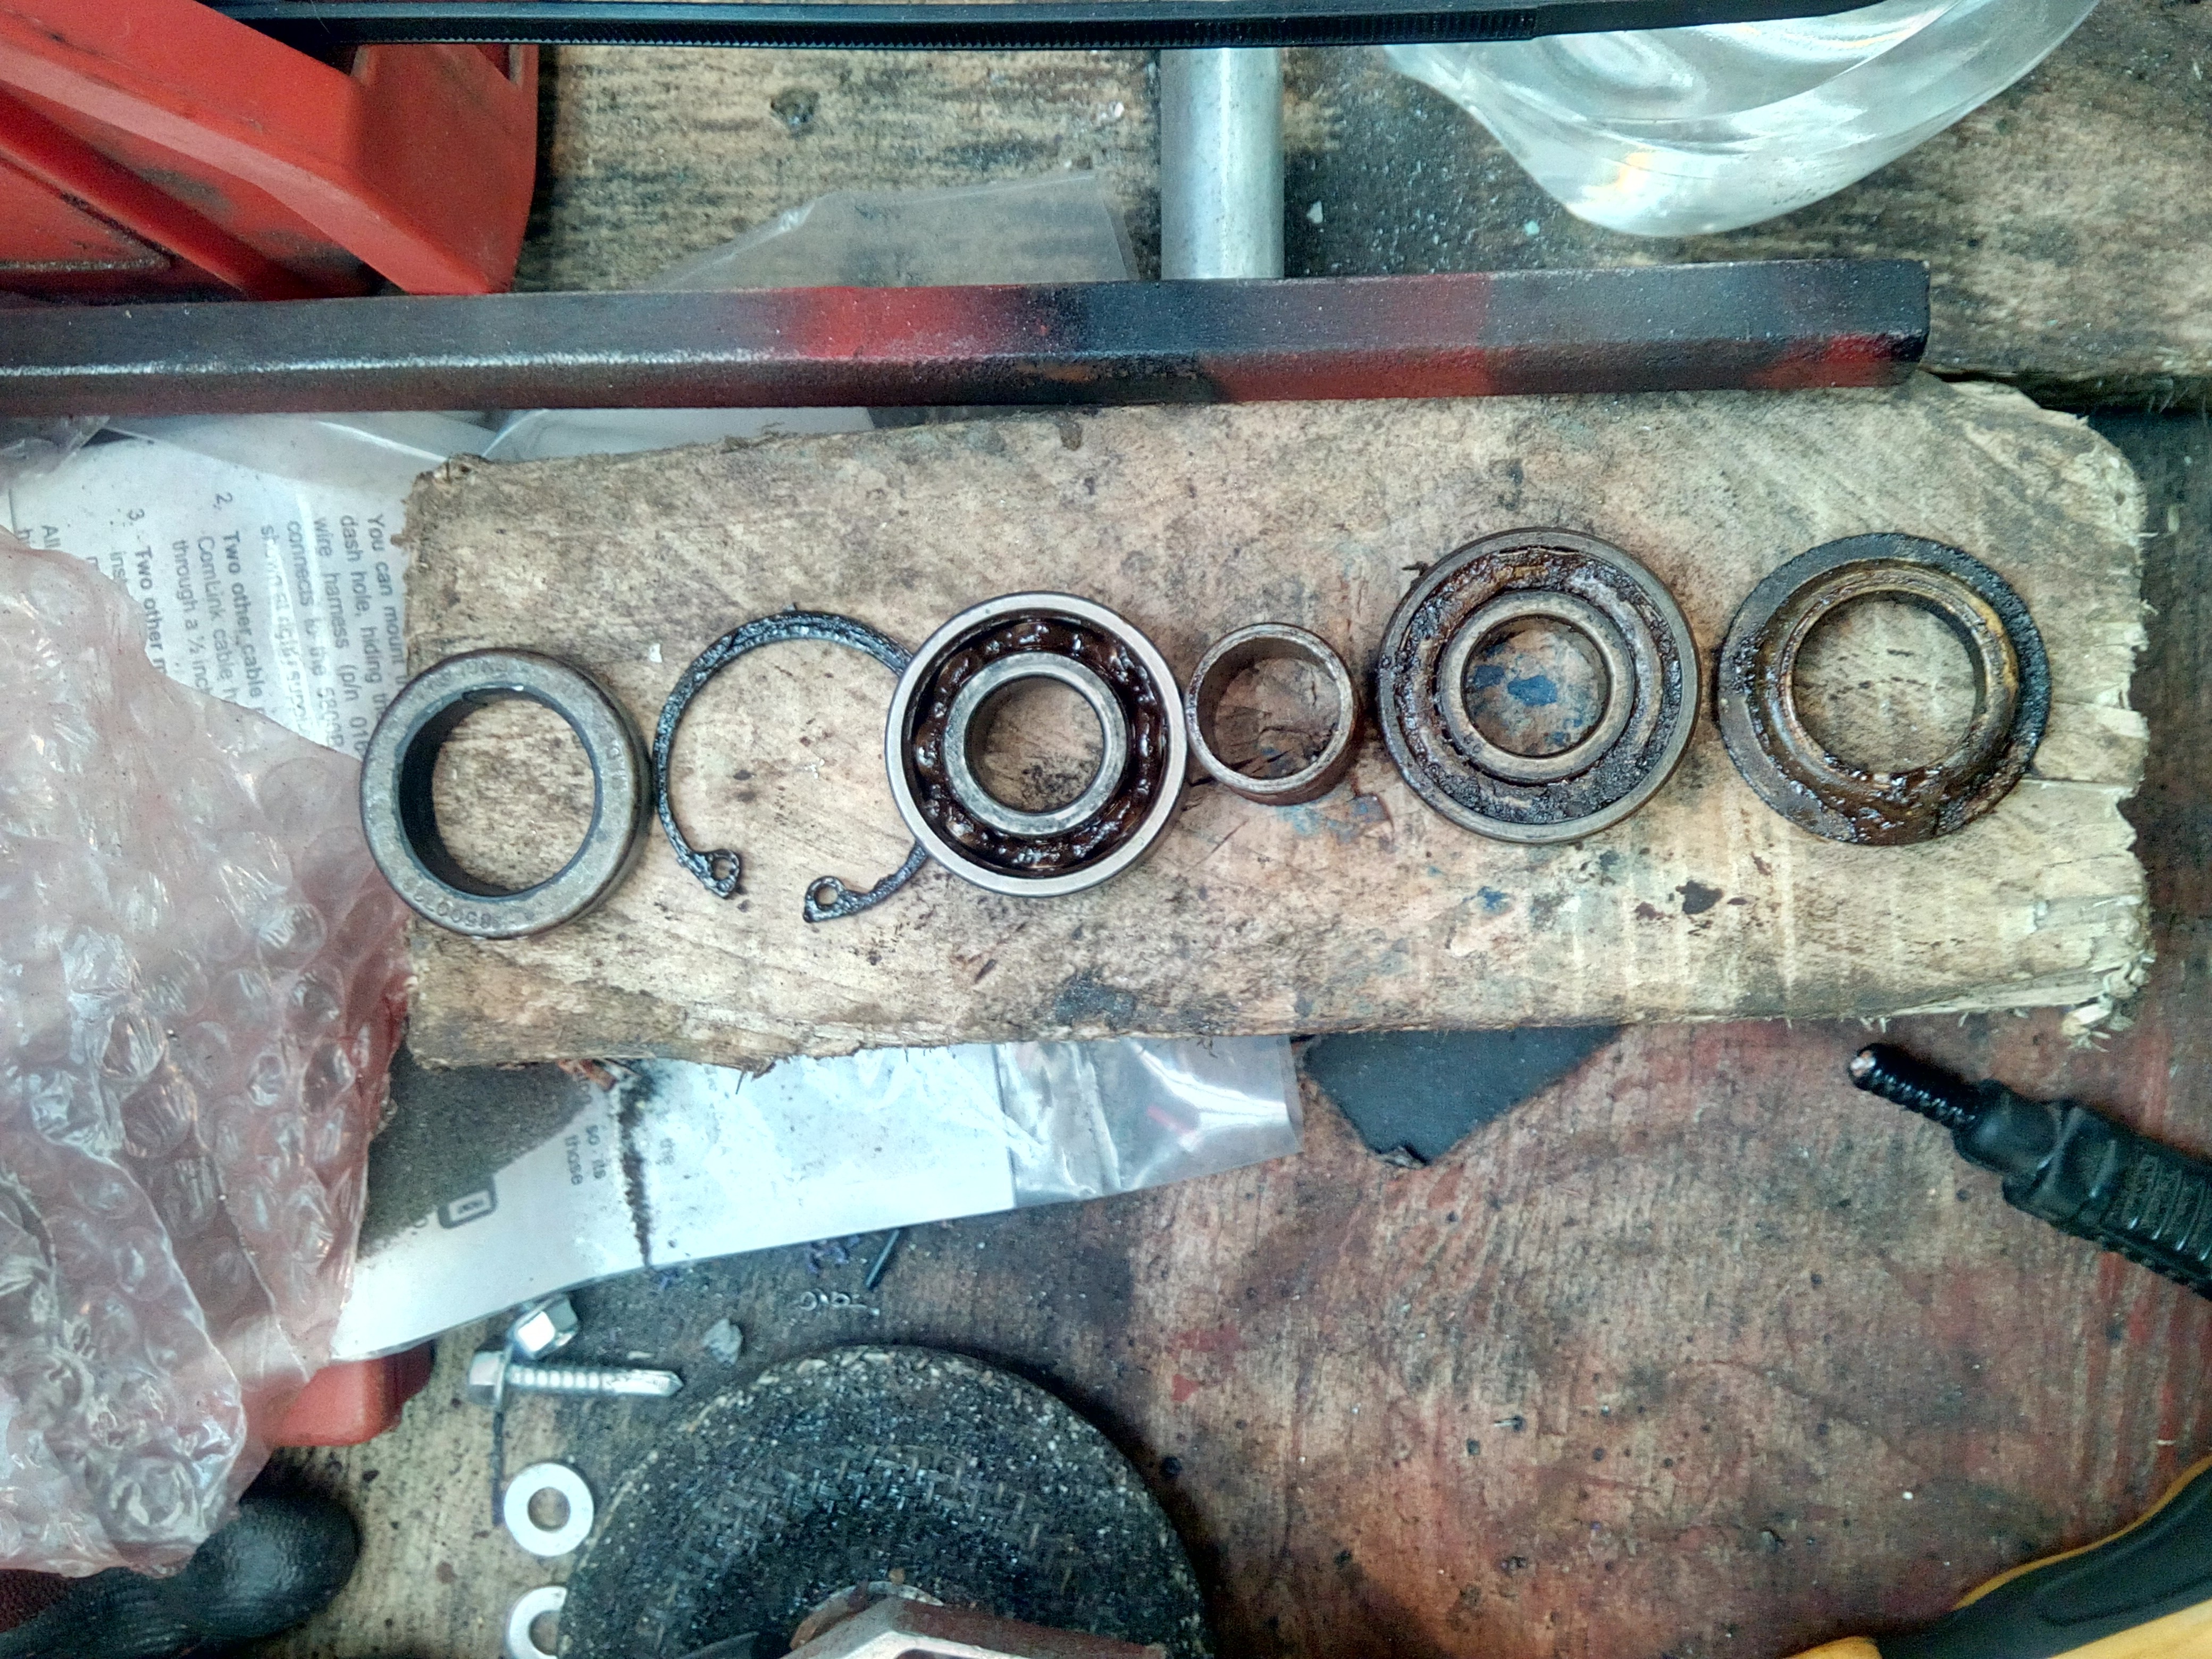 A line-up of the various water pump seals and bearings on the
bench. The seals are degraded, and the bearings are full of rust.